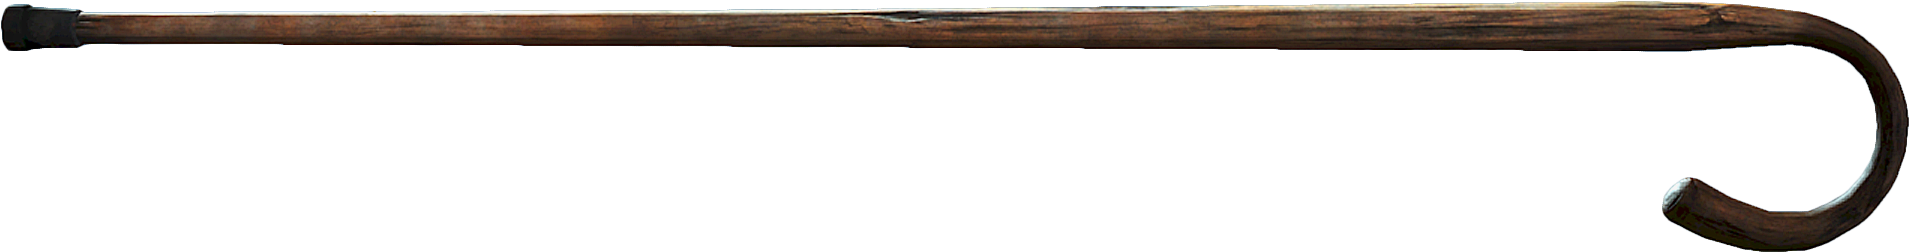 Classic Wooden Walking Stick PNG